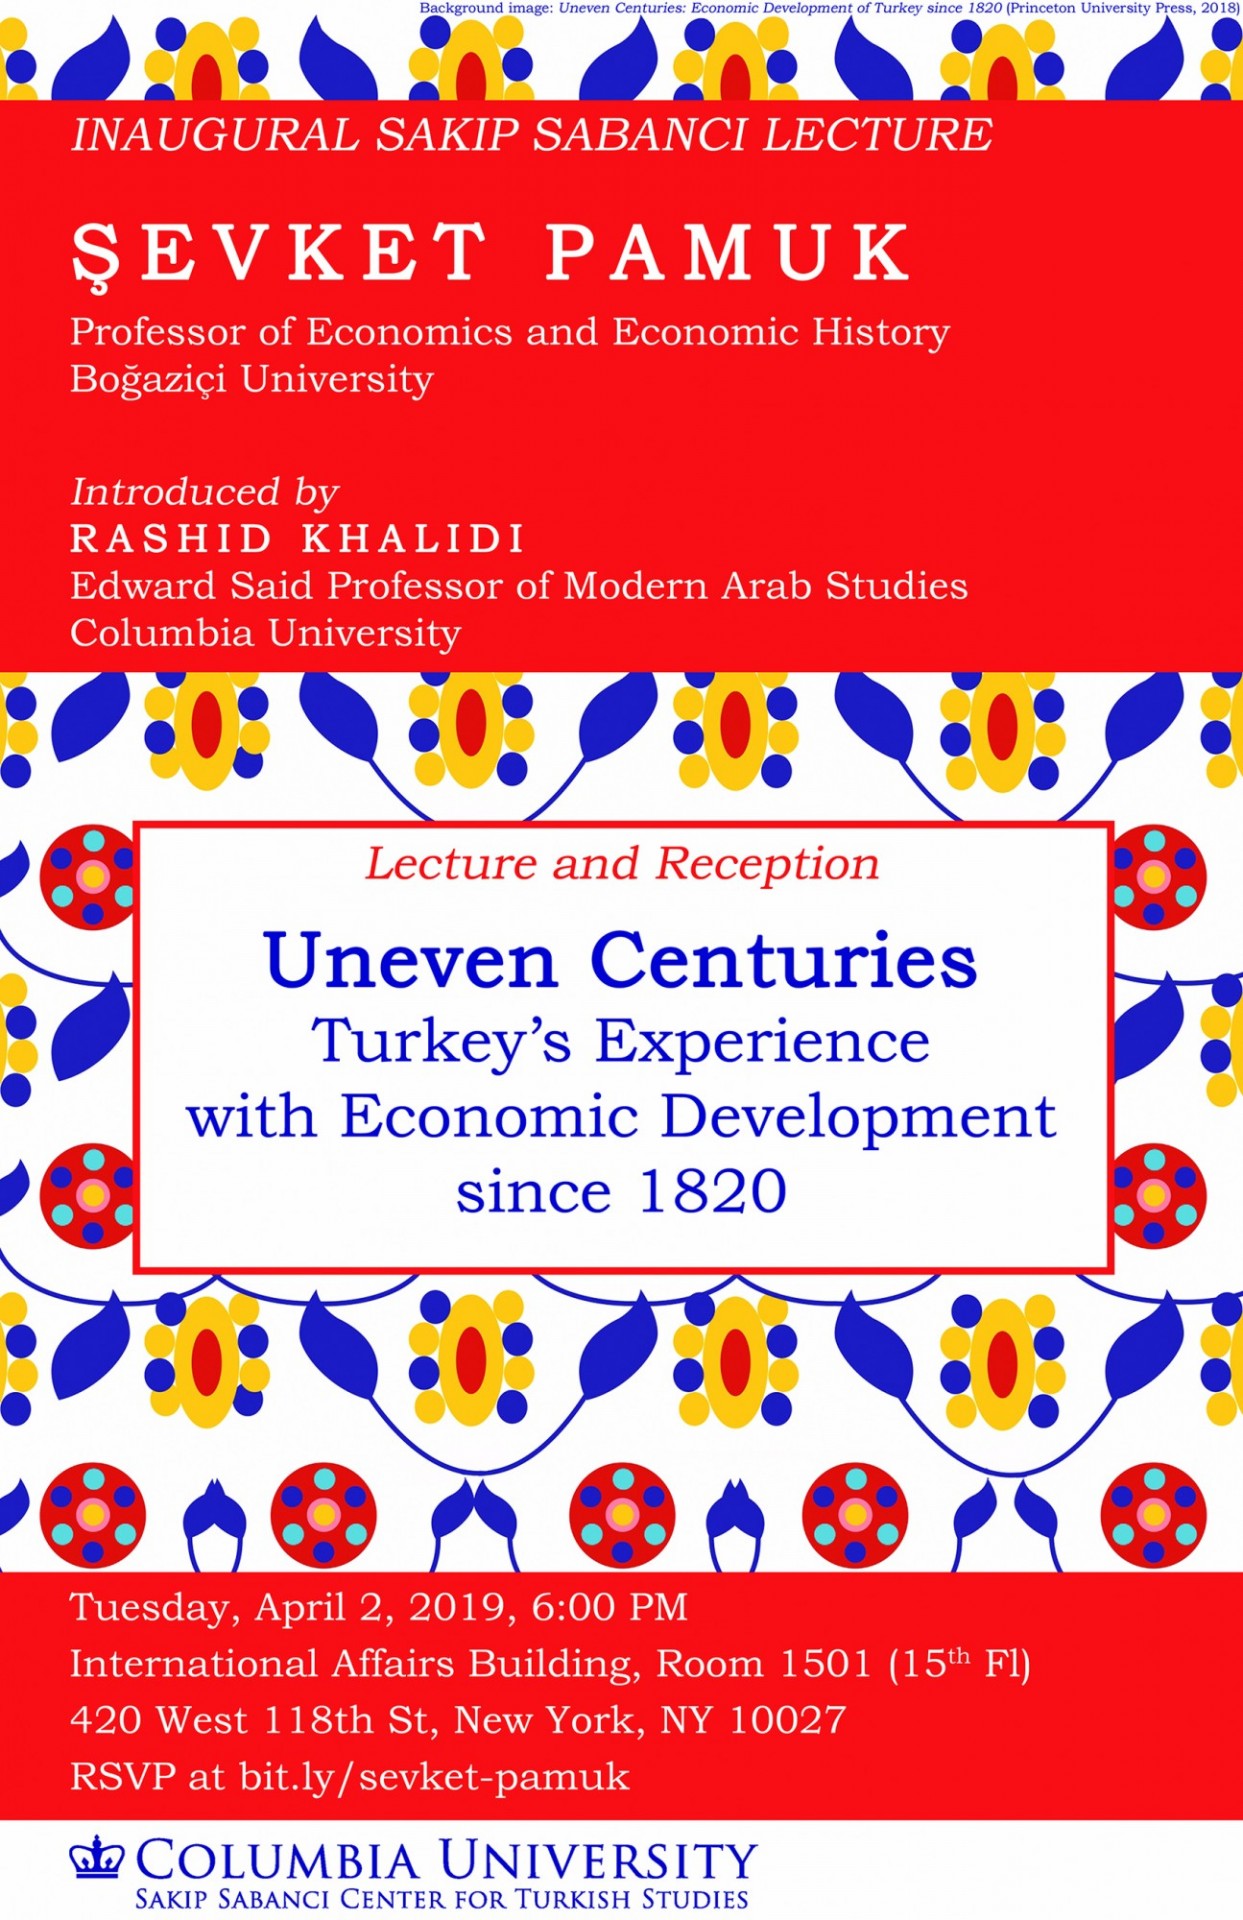 Event title over a brightly patterned background: Uneven Centuries - Turkey’s Experience with Economic Development since 1820